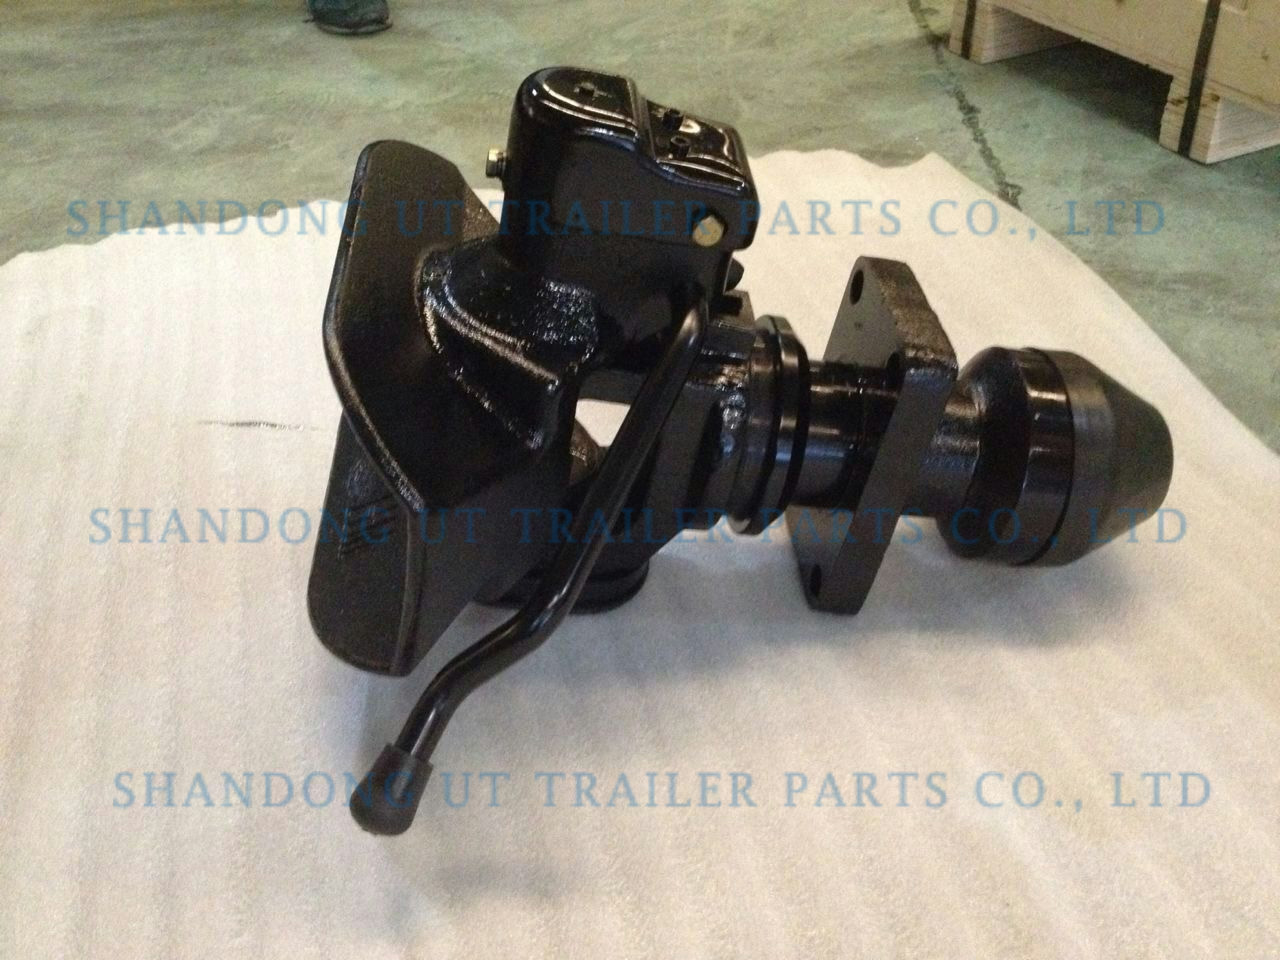 UTTC40 Towing Hitch Automatic Trailer Coupling